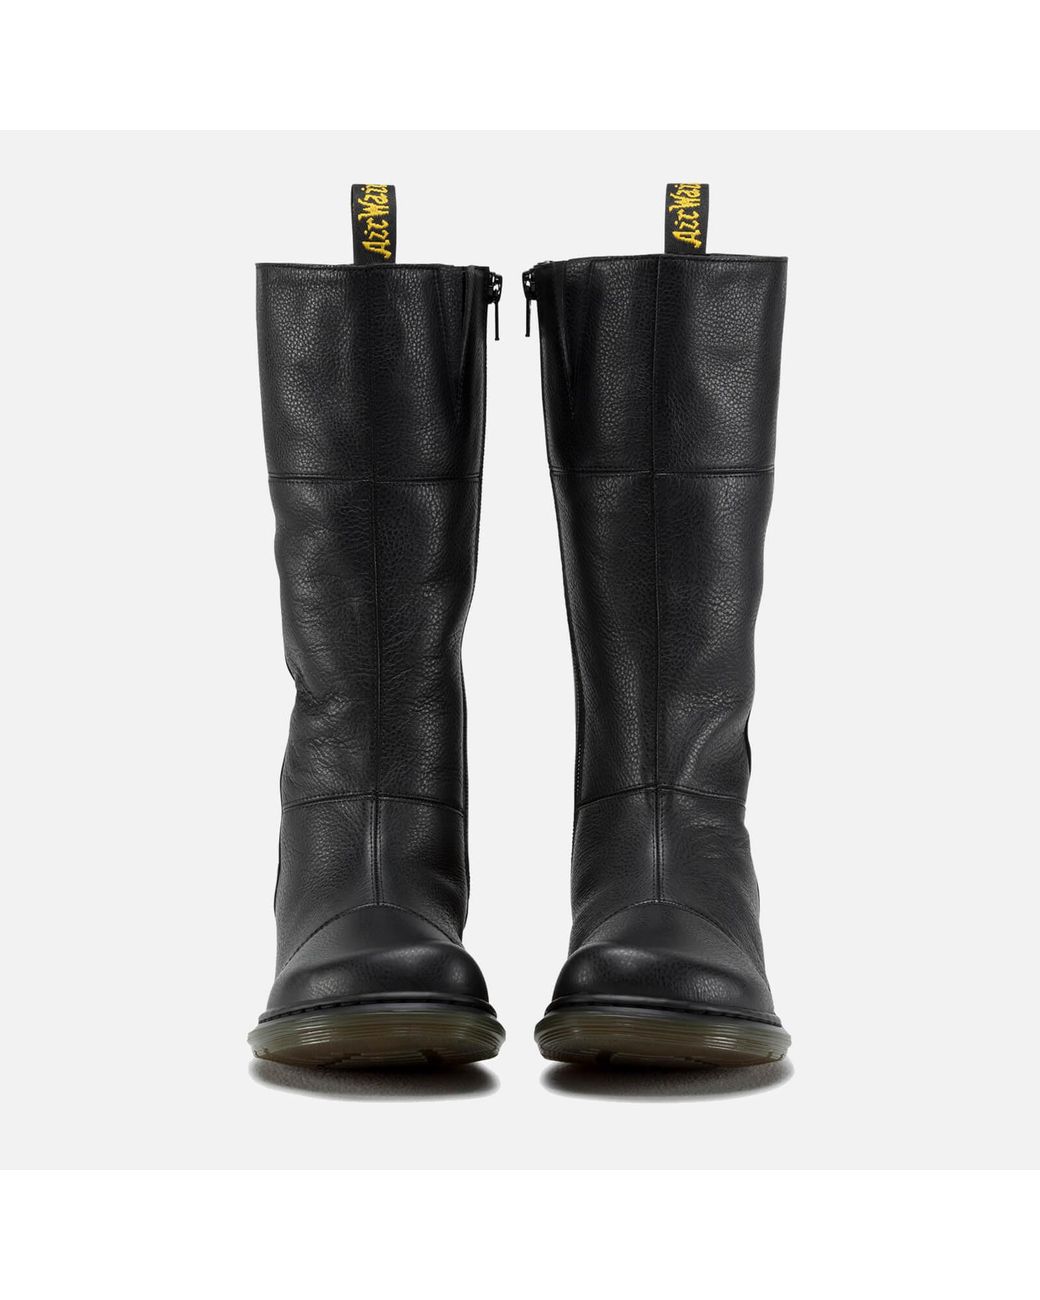 Dr. Martens Charla Broadway High Boots in Black | Lyst UK